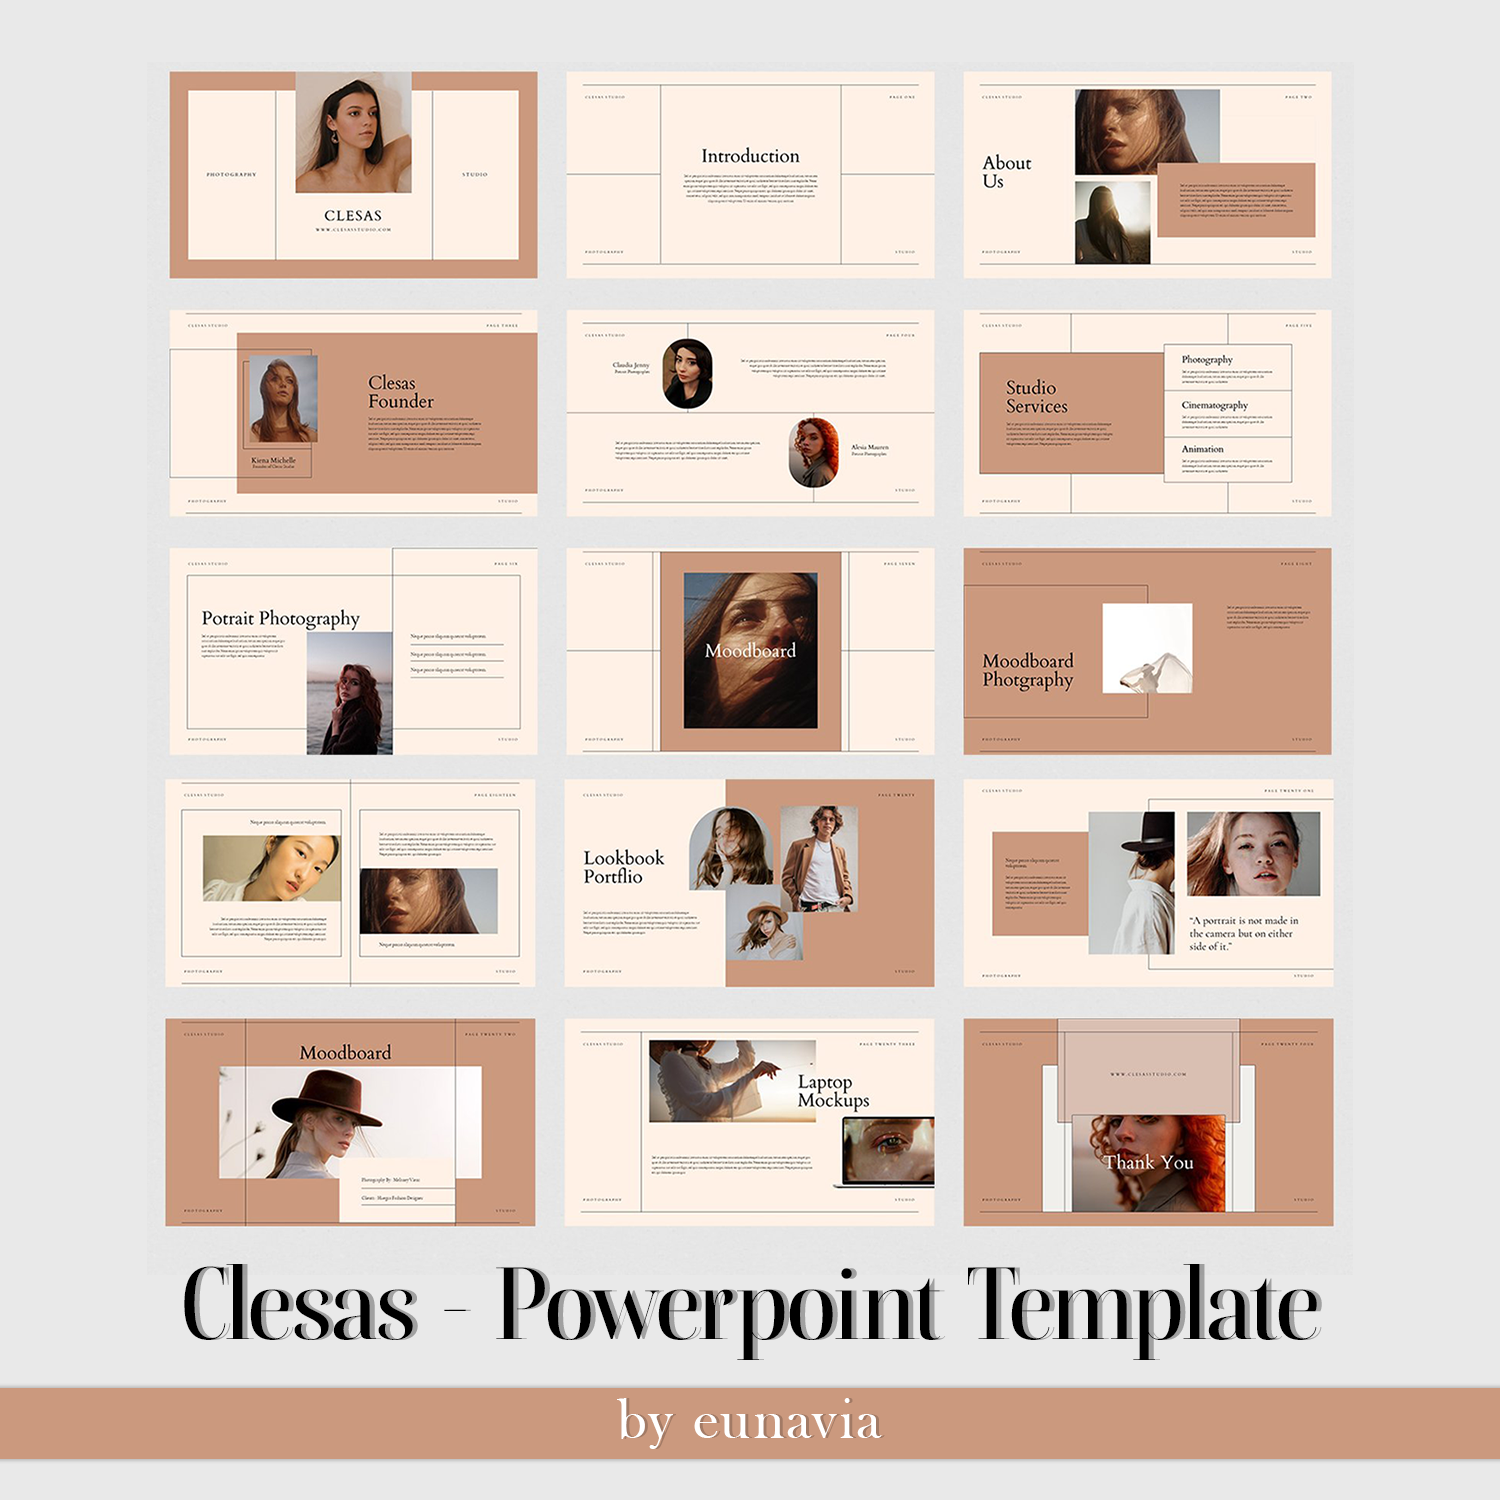 Prints of clesas powerpoint template.